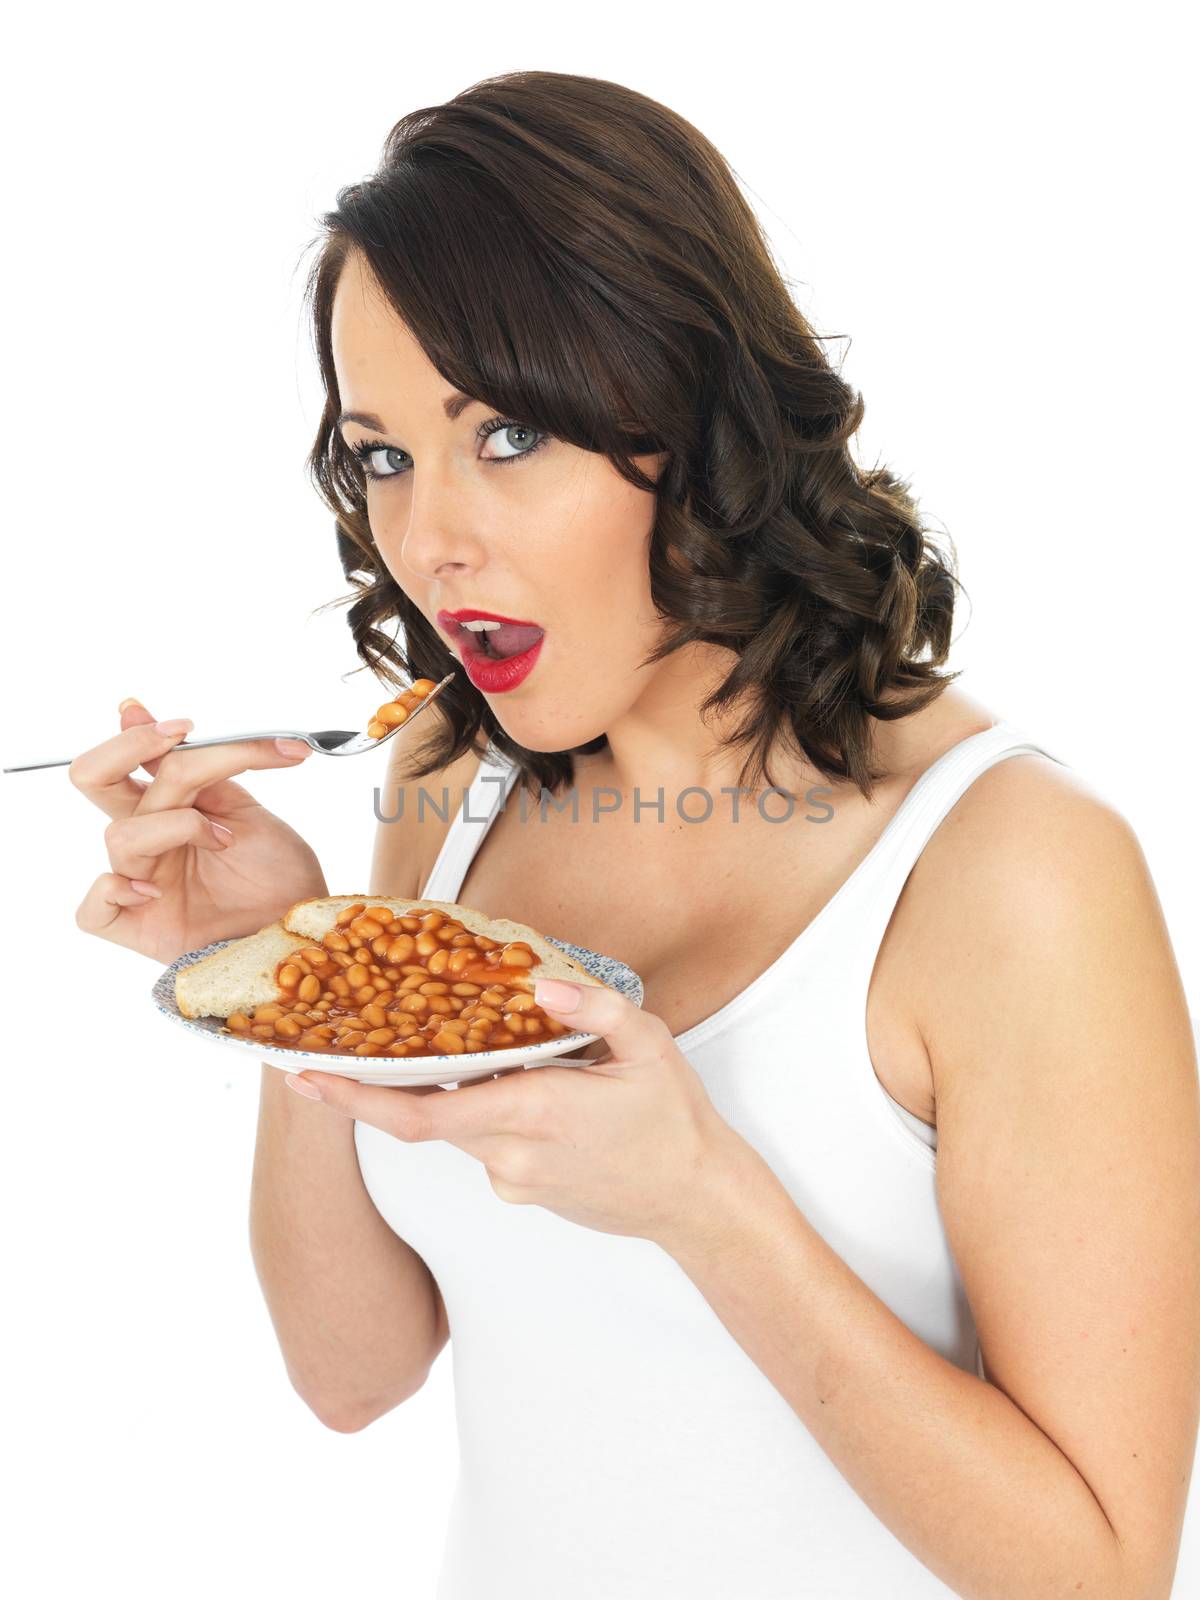 Young Woman Eating Baked Beans on Toast by Whiteboxmedia